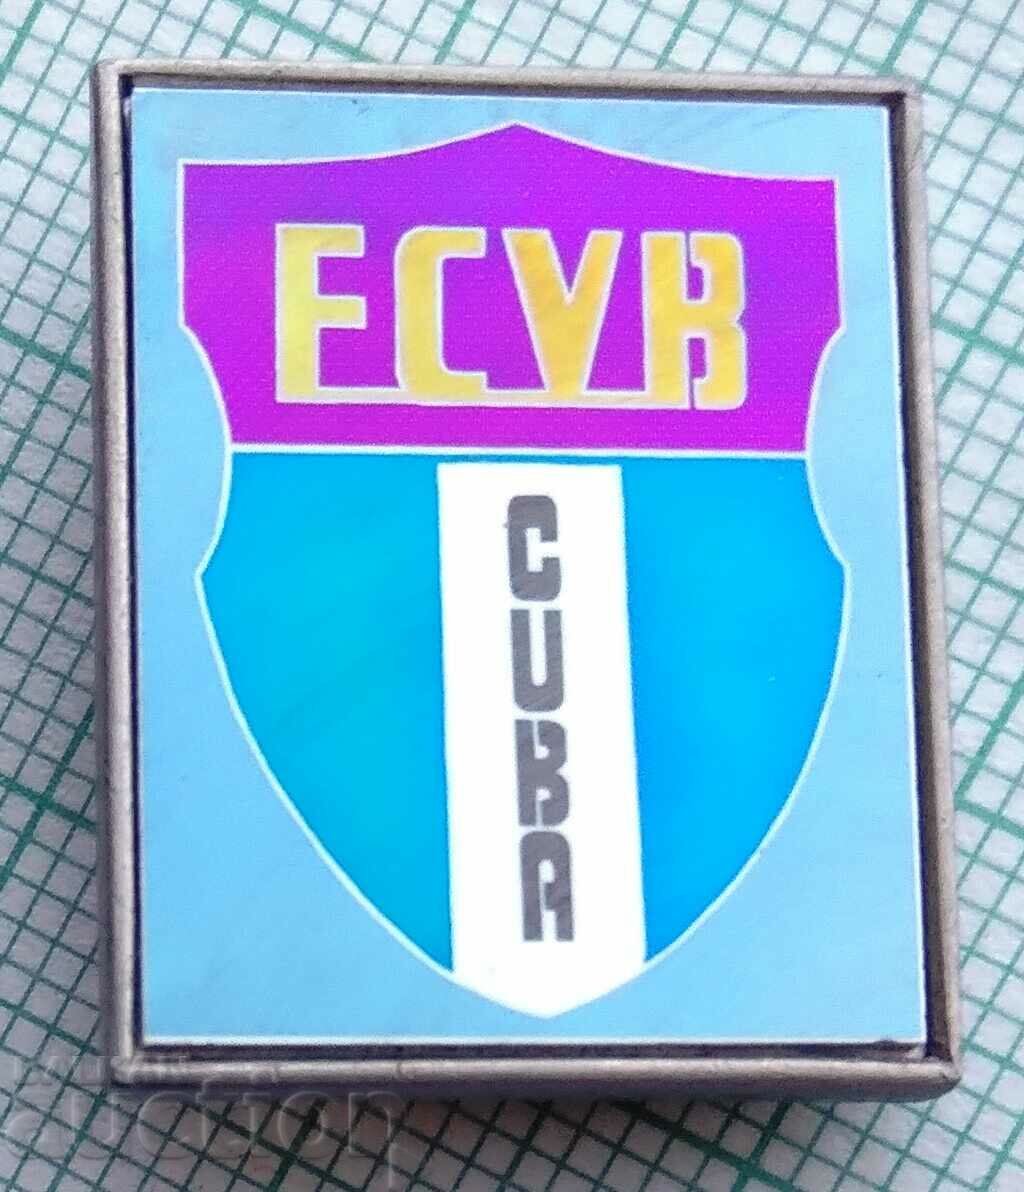 11813 Badge - FCVB Volleyball Federation of Cuba